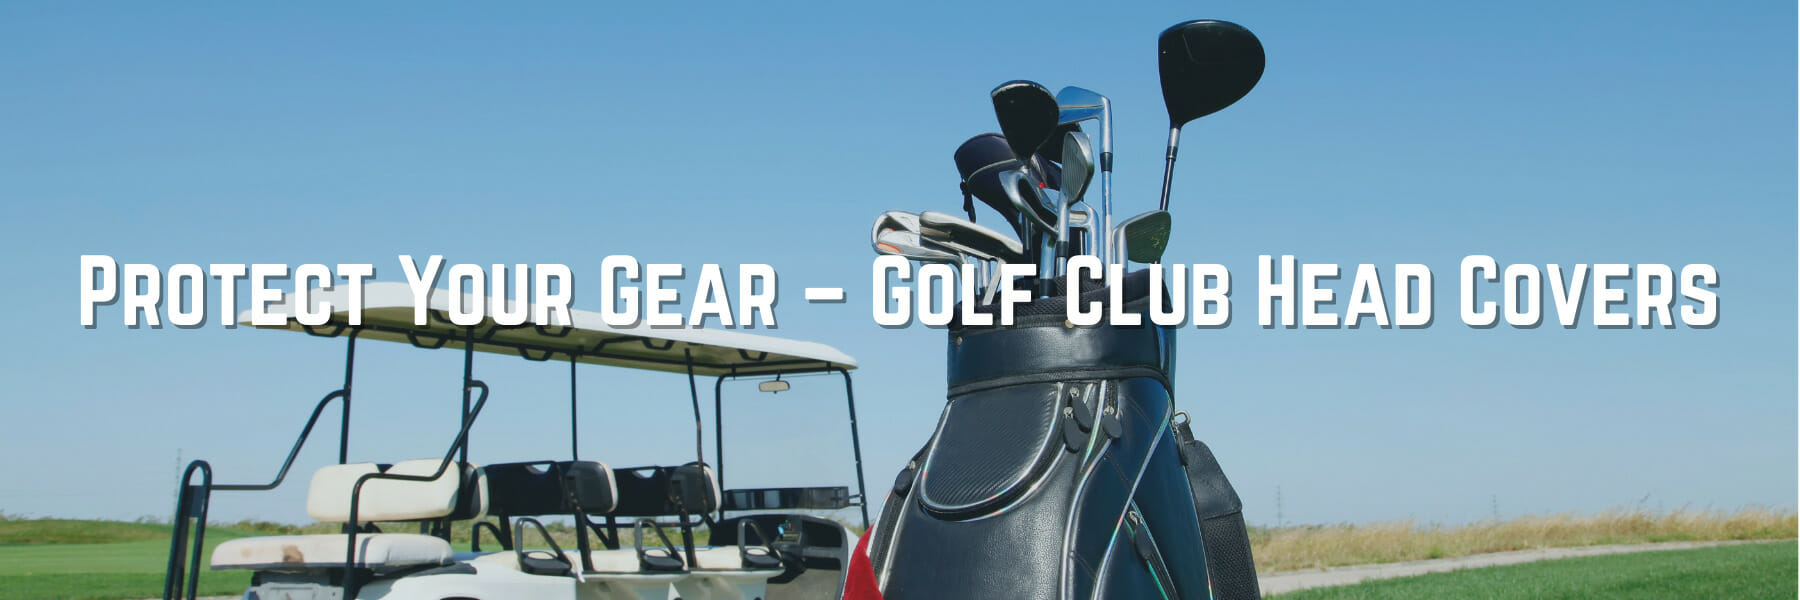 Protect Your Gear - Golf Club Head Covers